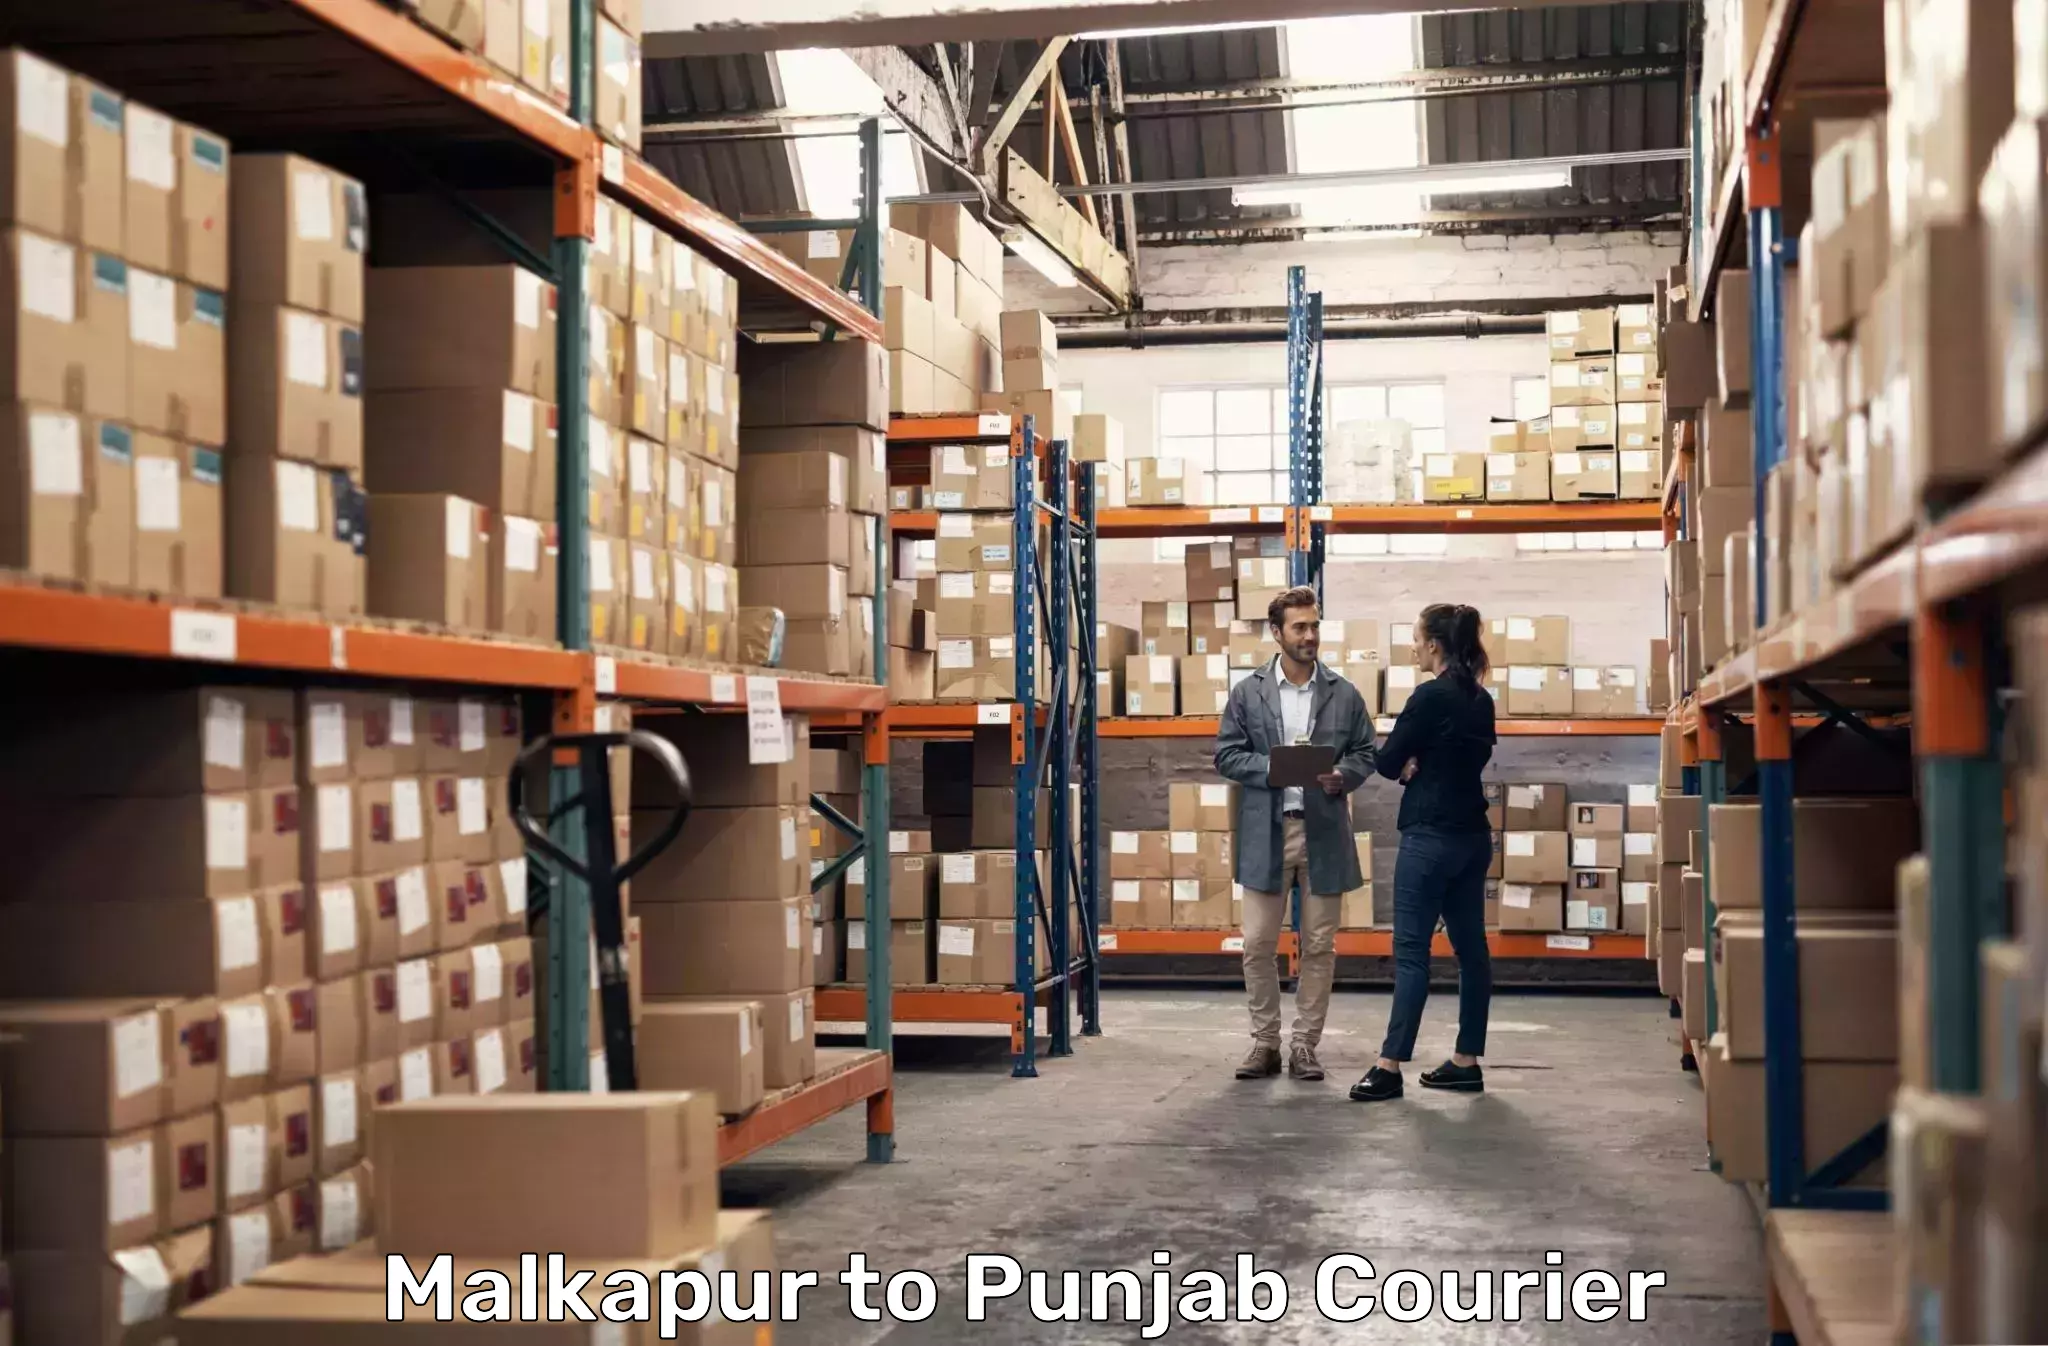 Express delivery capabilities Malkapur to Punjab